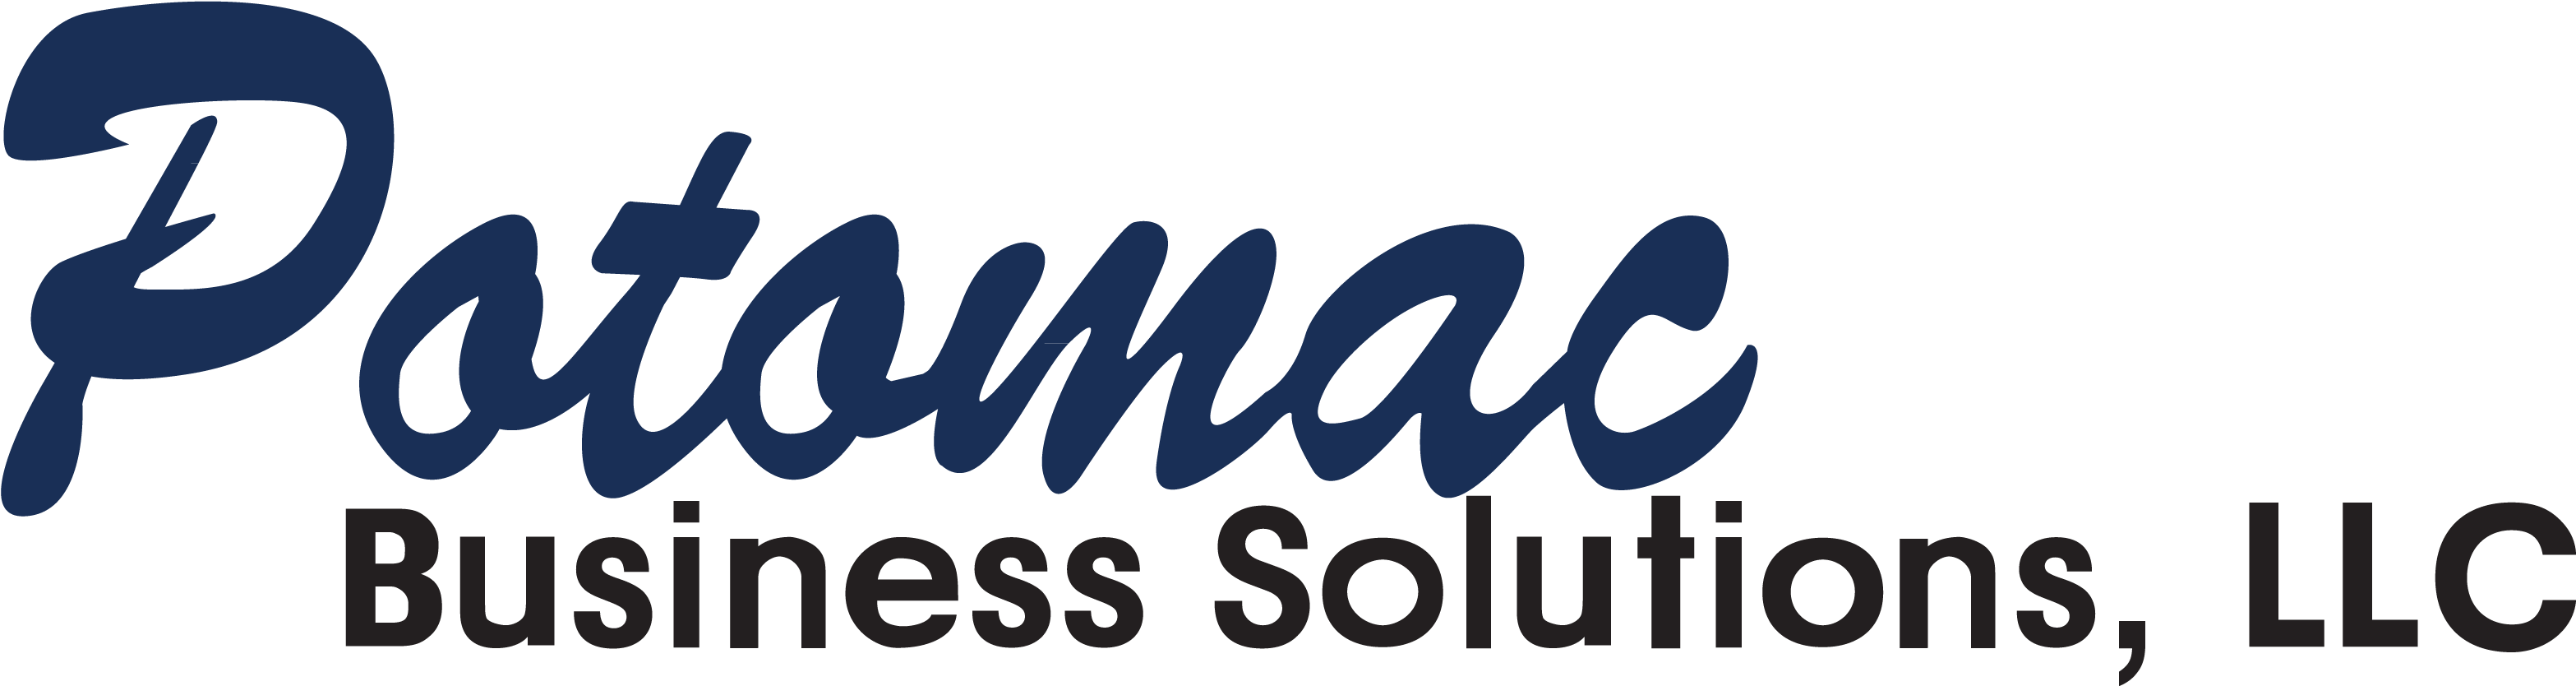 Potomac Business Solutions - Home (3181x854), Png Download